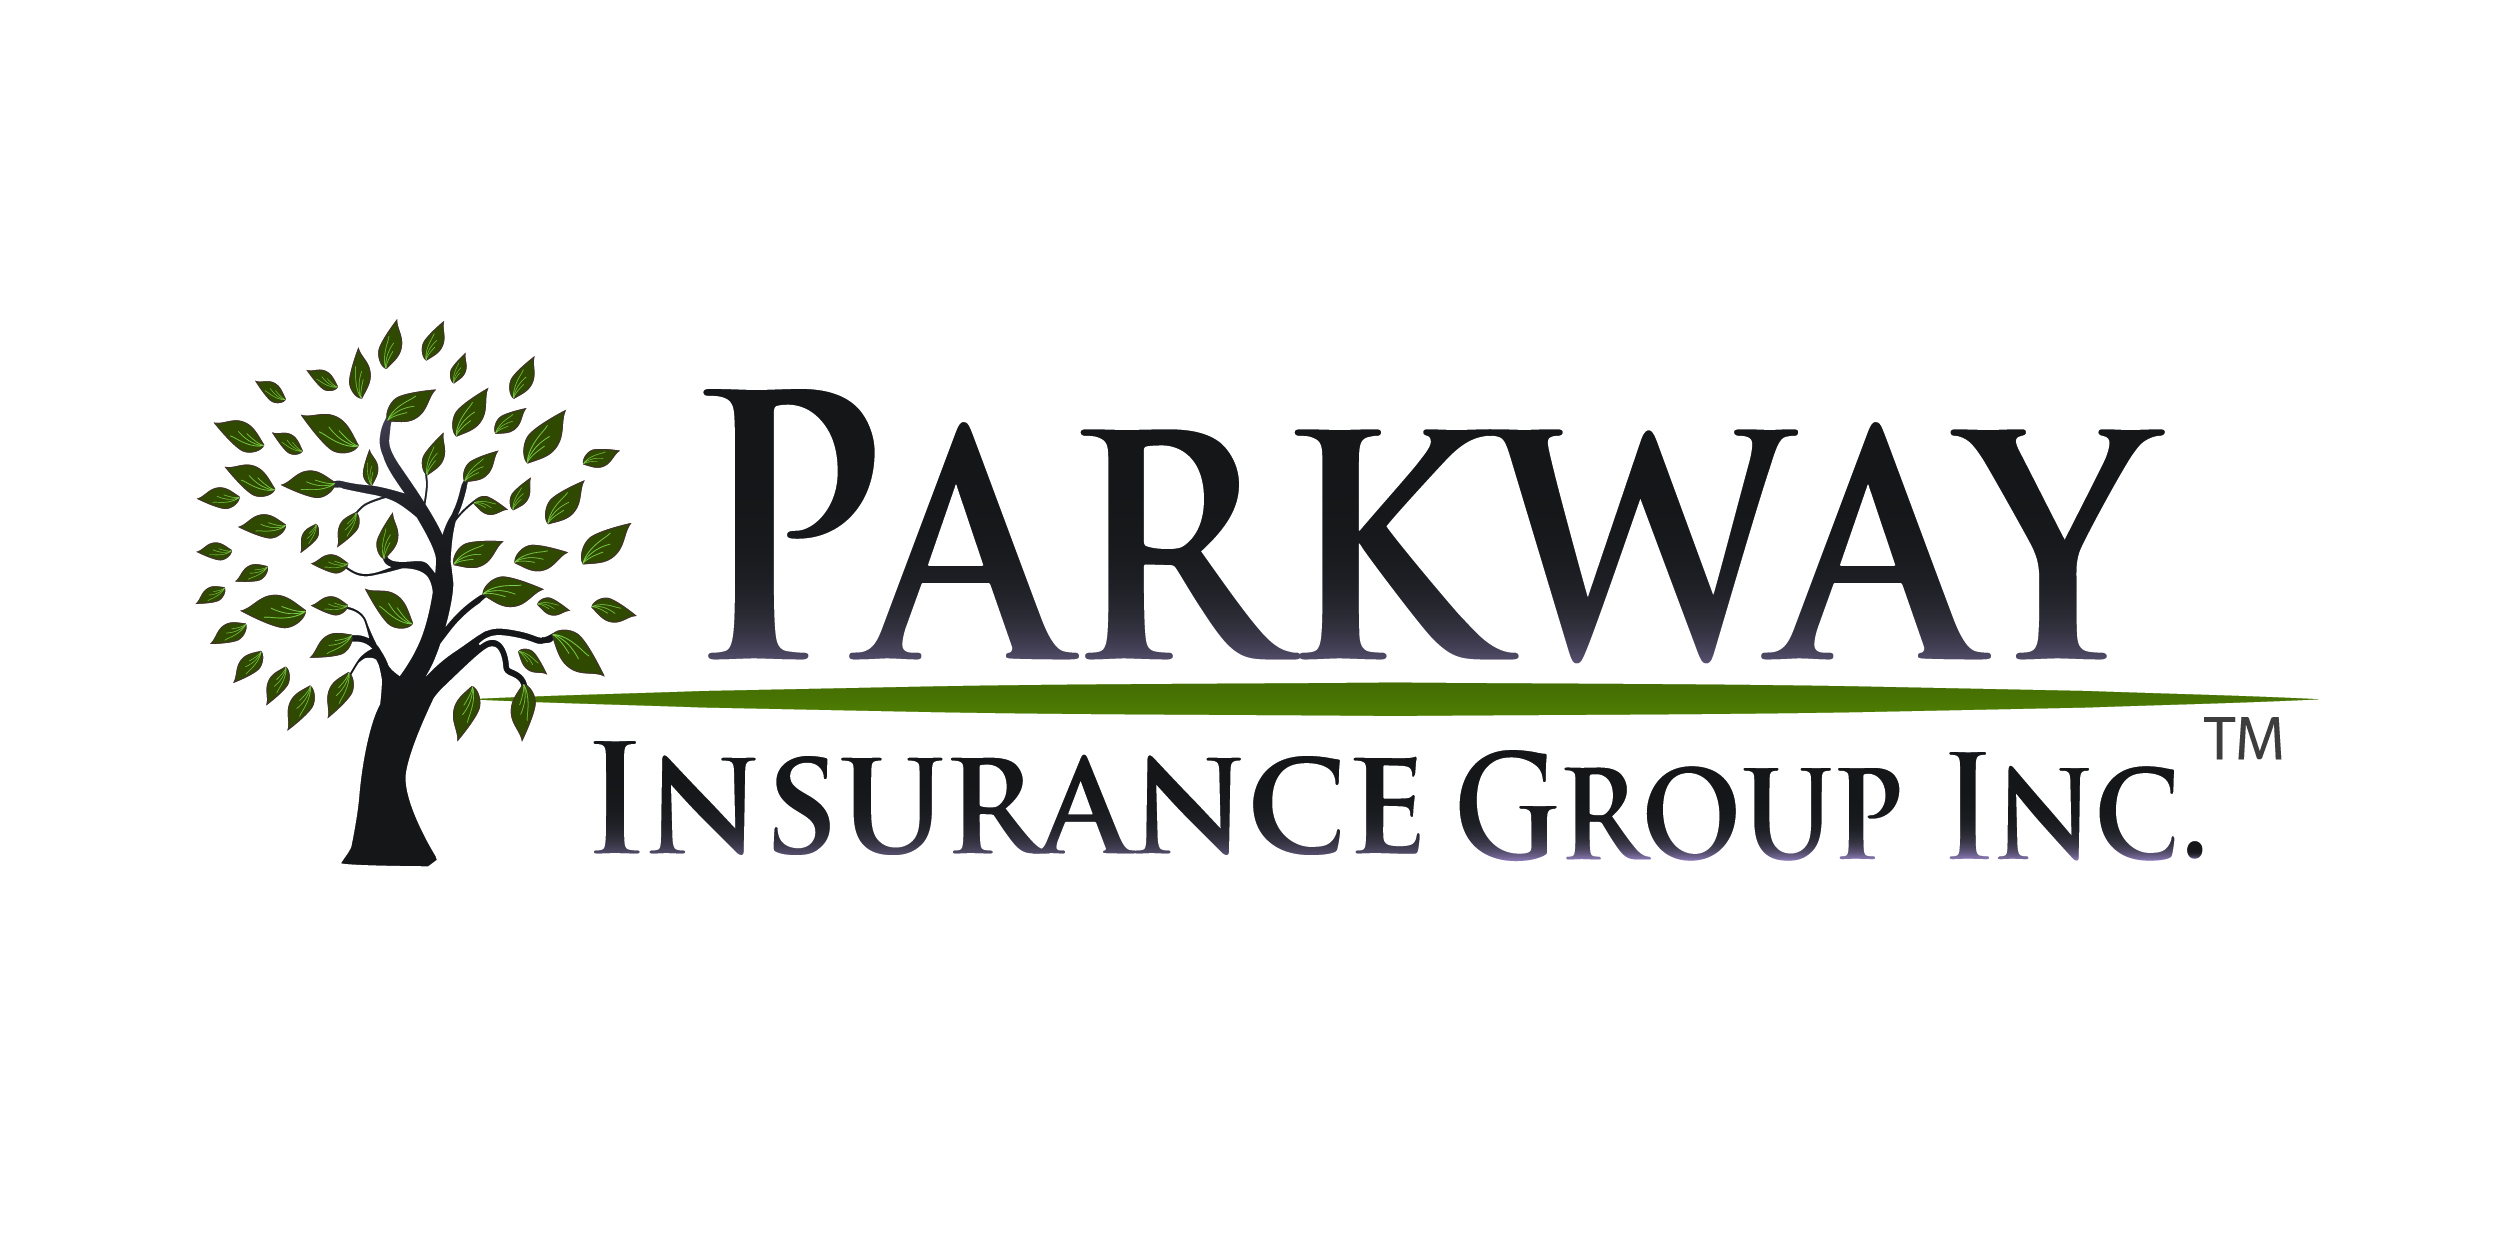 Parkway Insurance Group, Inc's logo